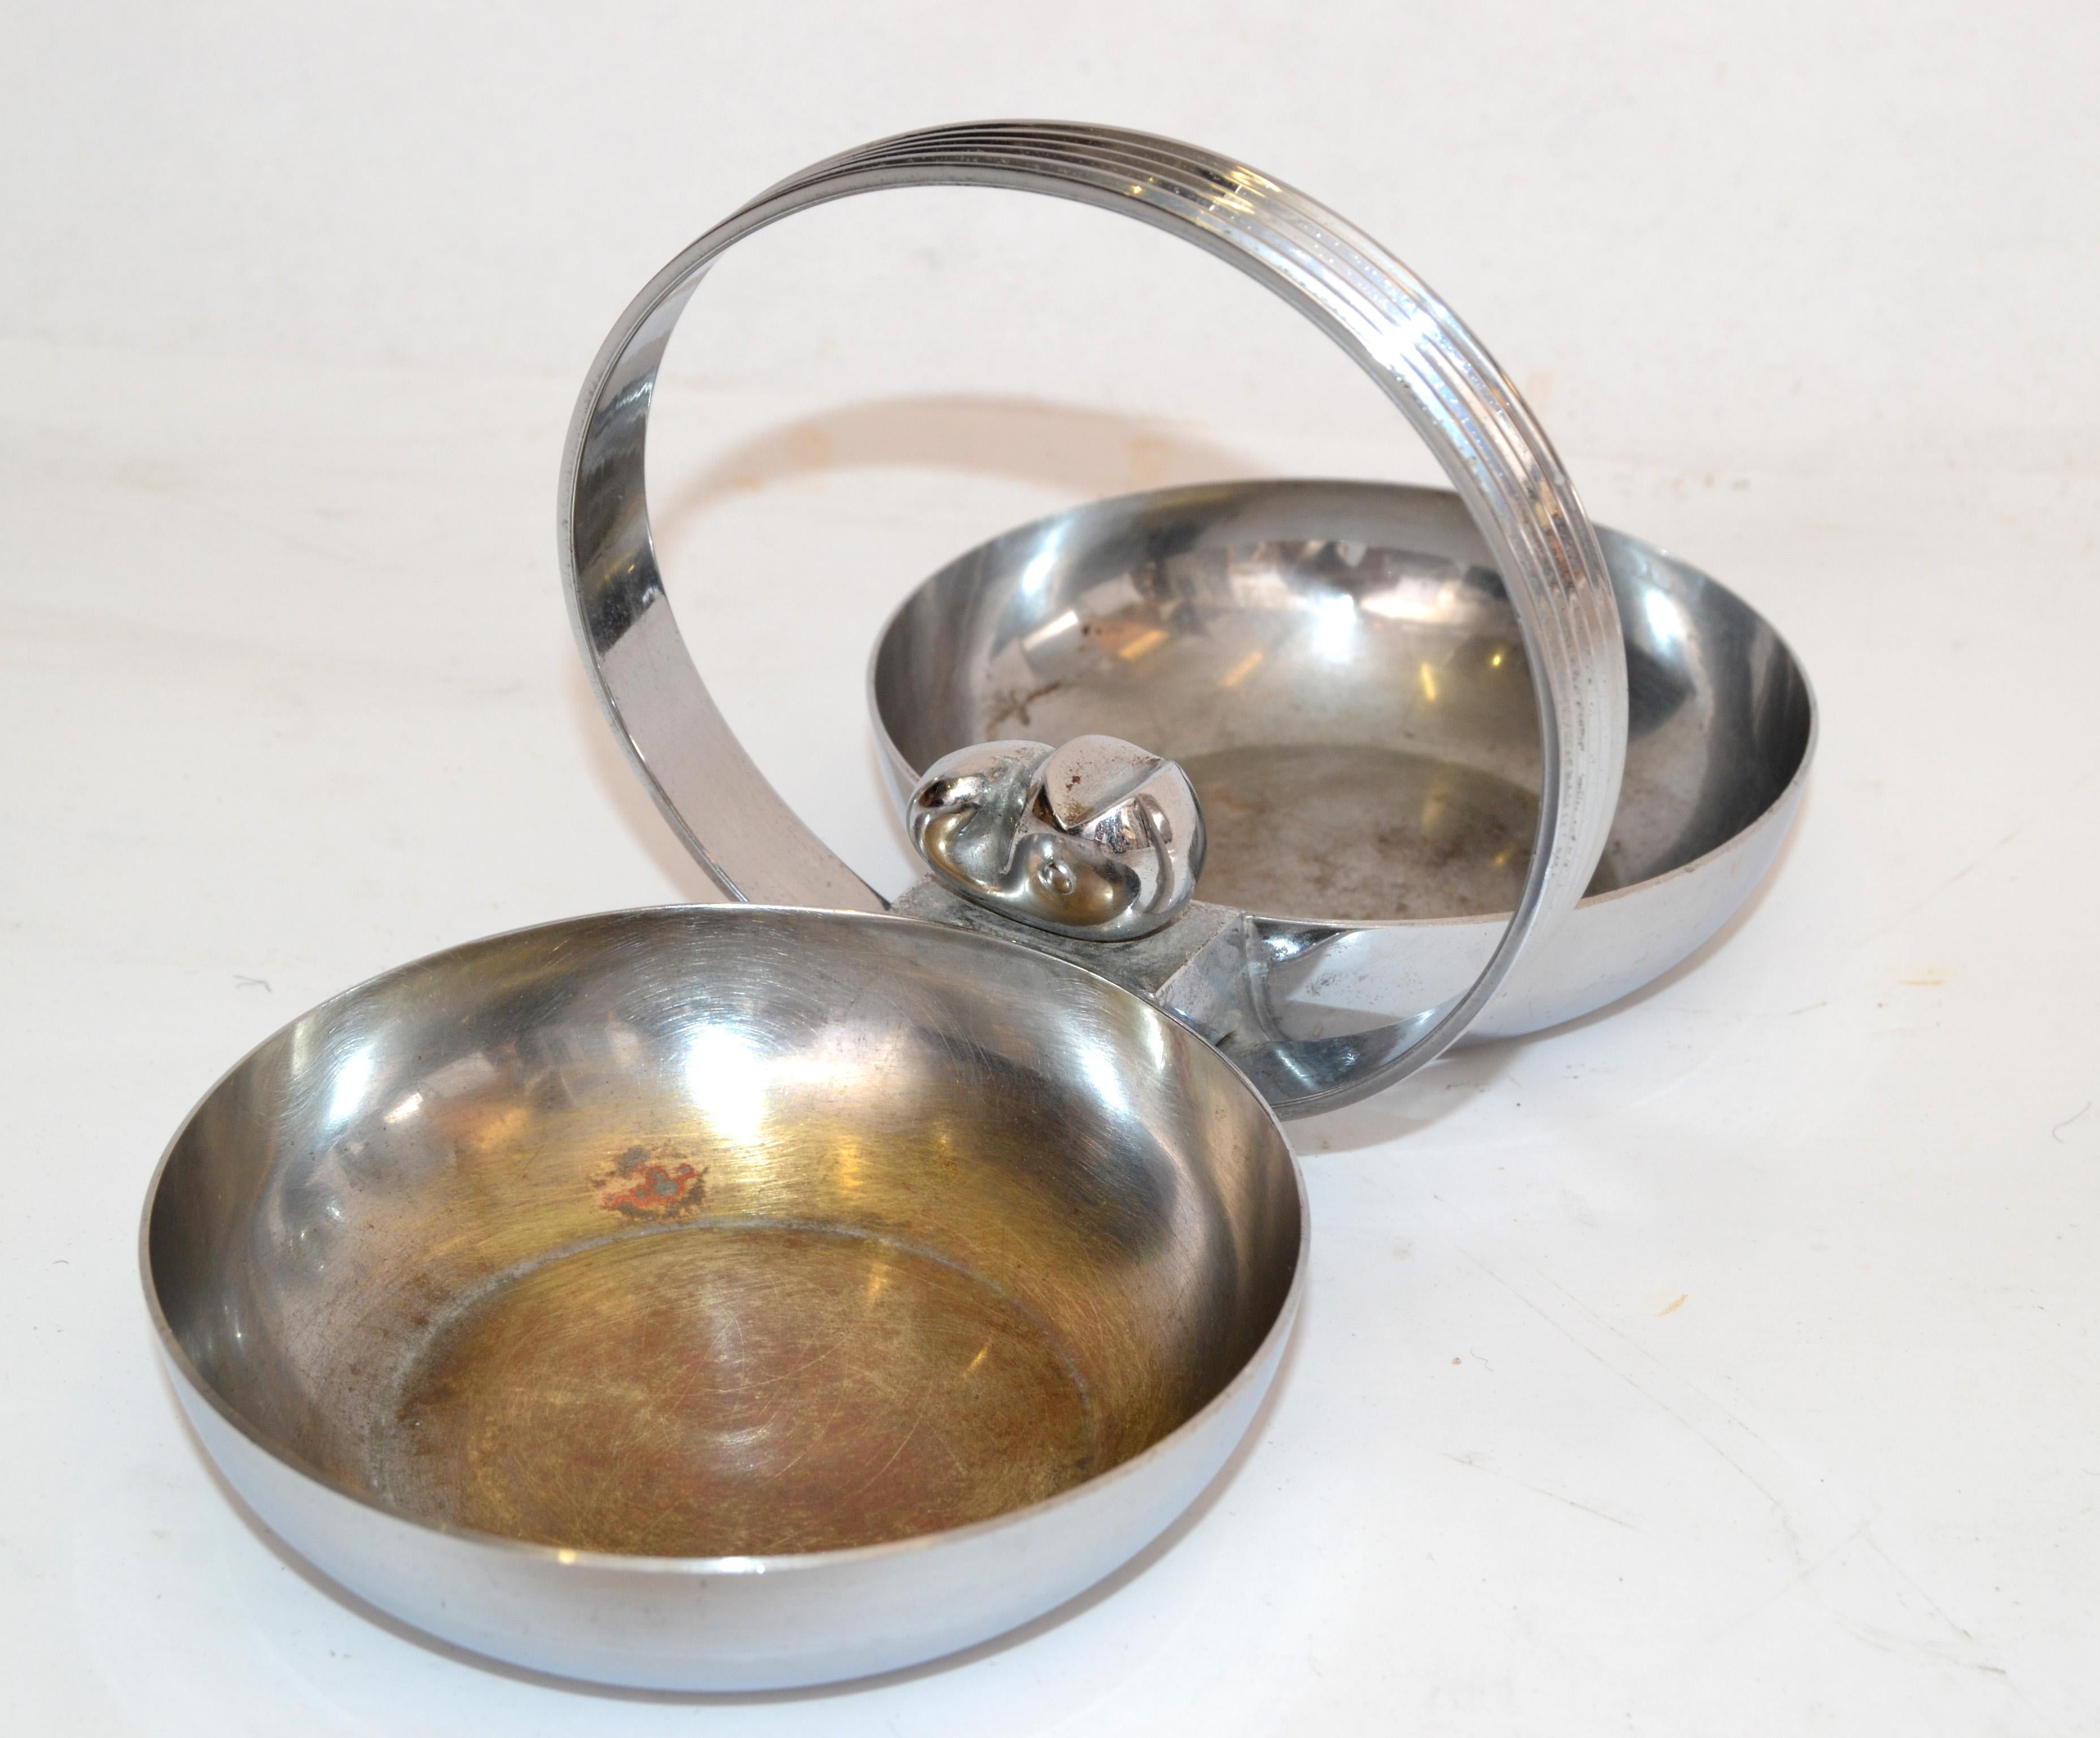 Art Deco Candy and Nut dish features 2 round bowls, decorated by a whale figurine with a hoop handle that is ribbed on both sides, designed by Gerth and Gerth and made by Chase USA. 
The Chrome Plate over solid Brass serving dish measures 8.75